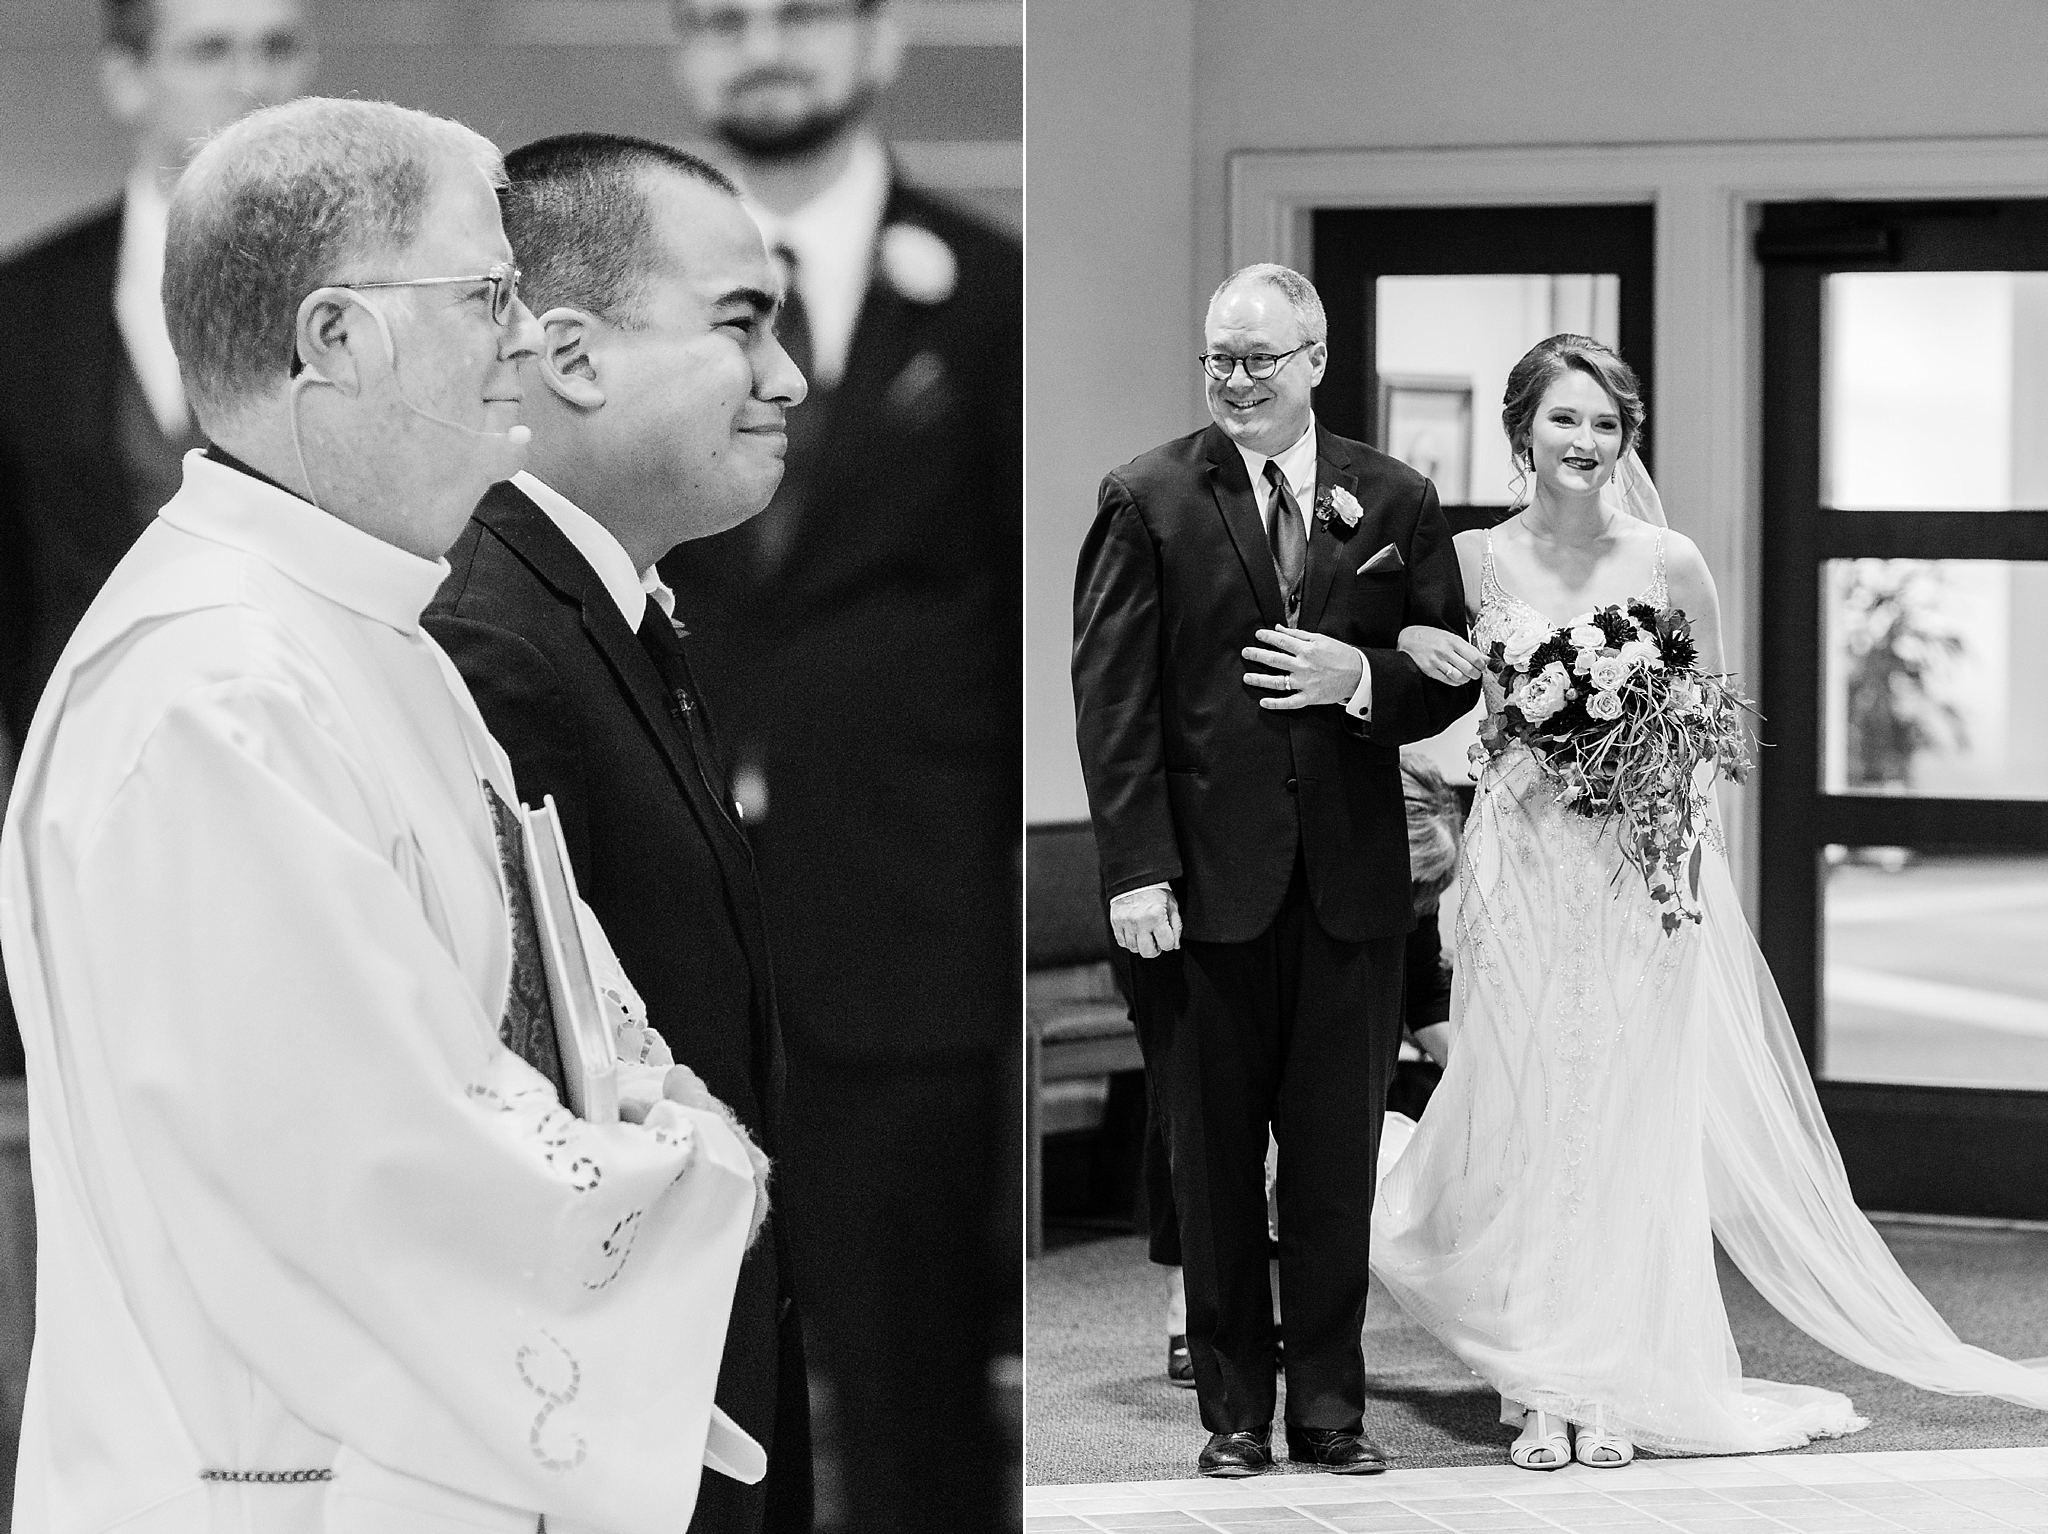 These September "I do's" took place during an art-deco inspired wedding at the John Marshall Ballrooms in Richmond, VA. 